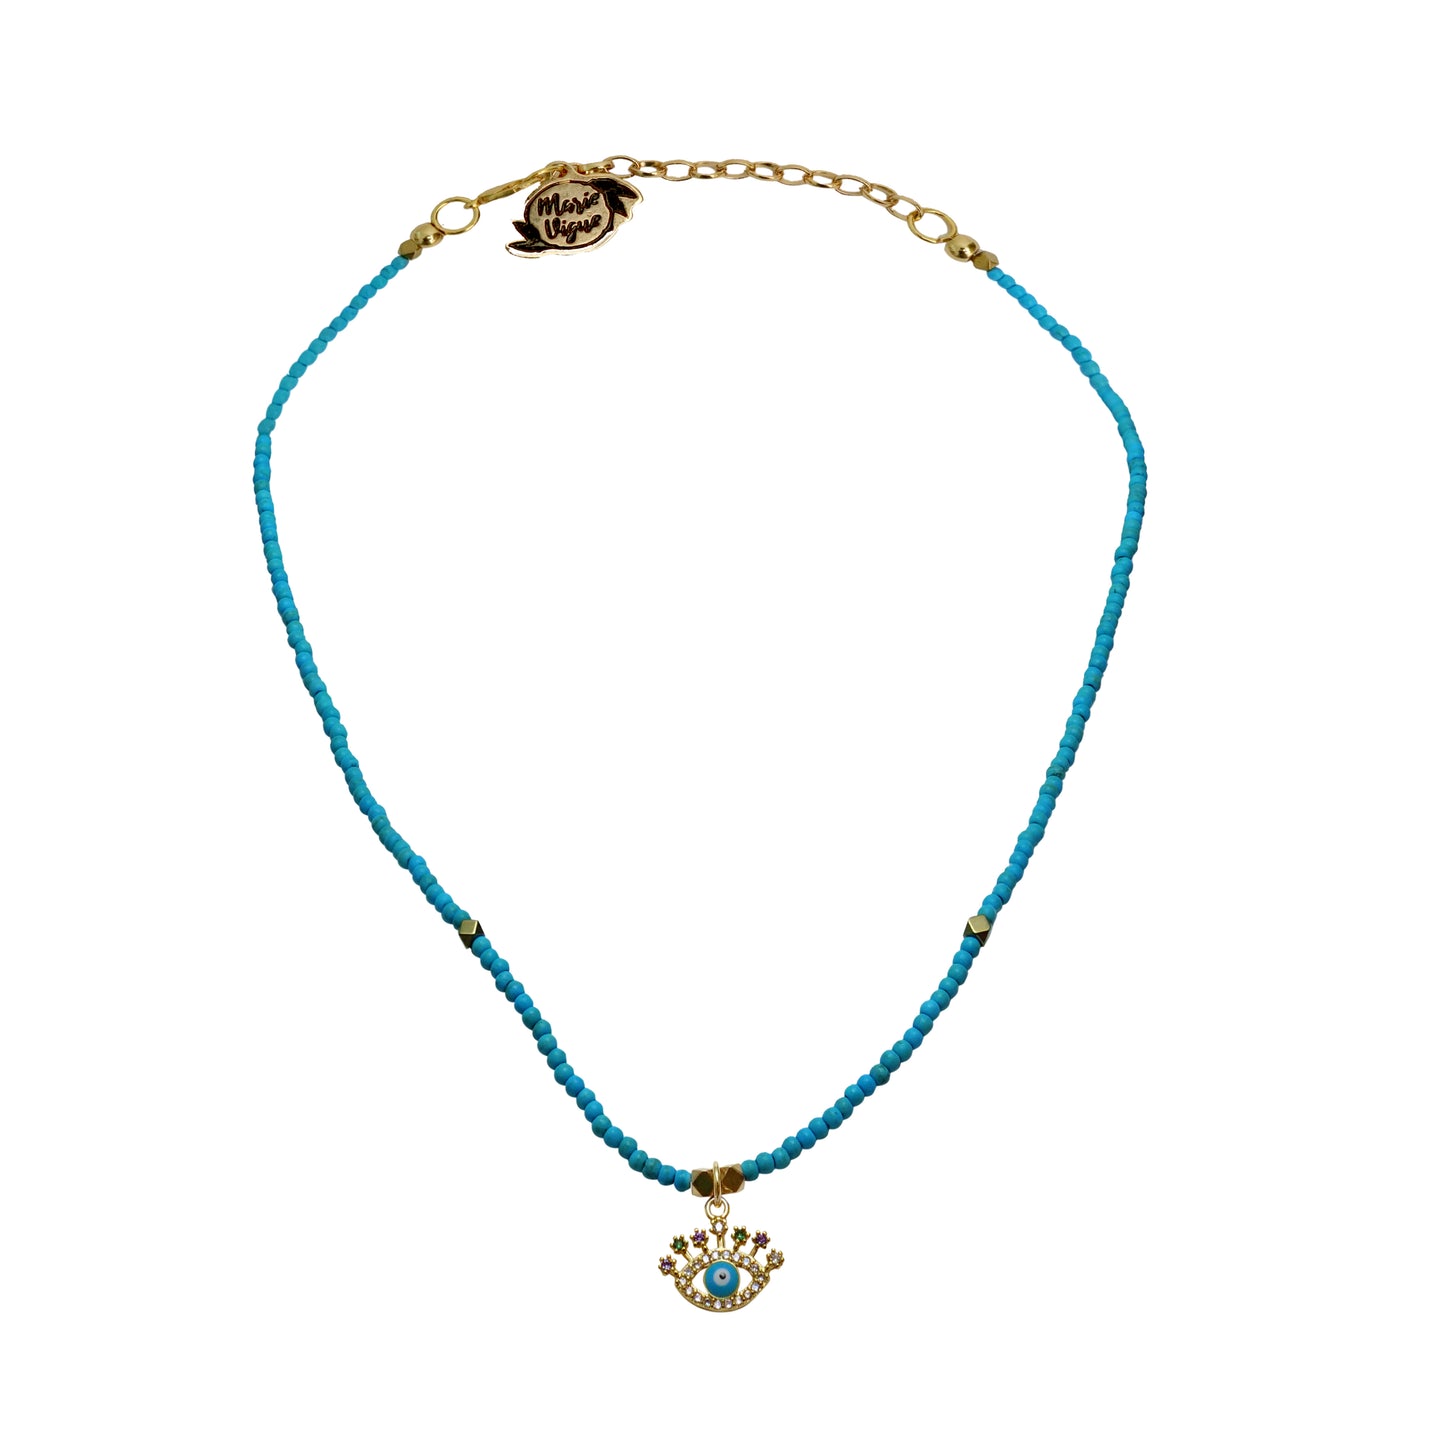 Turquoise Necklace With Crystal Eye Pendant